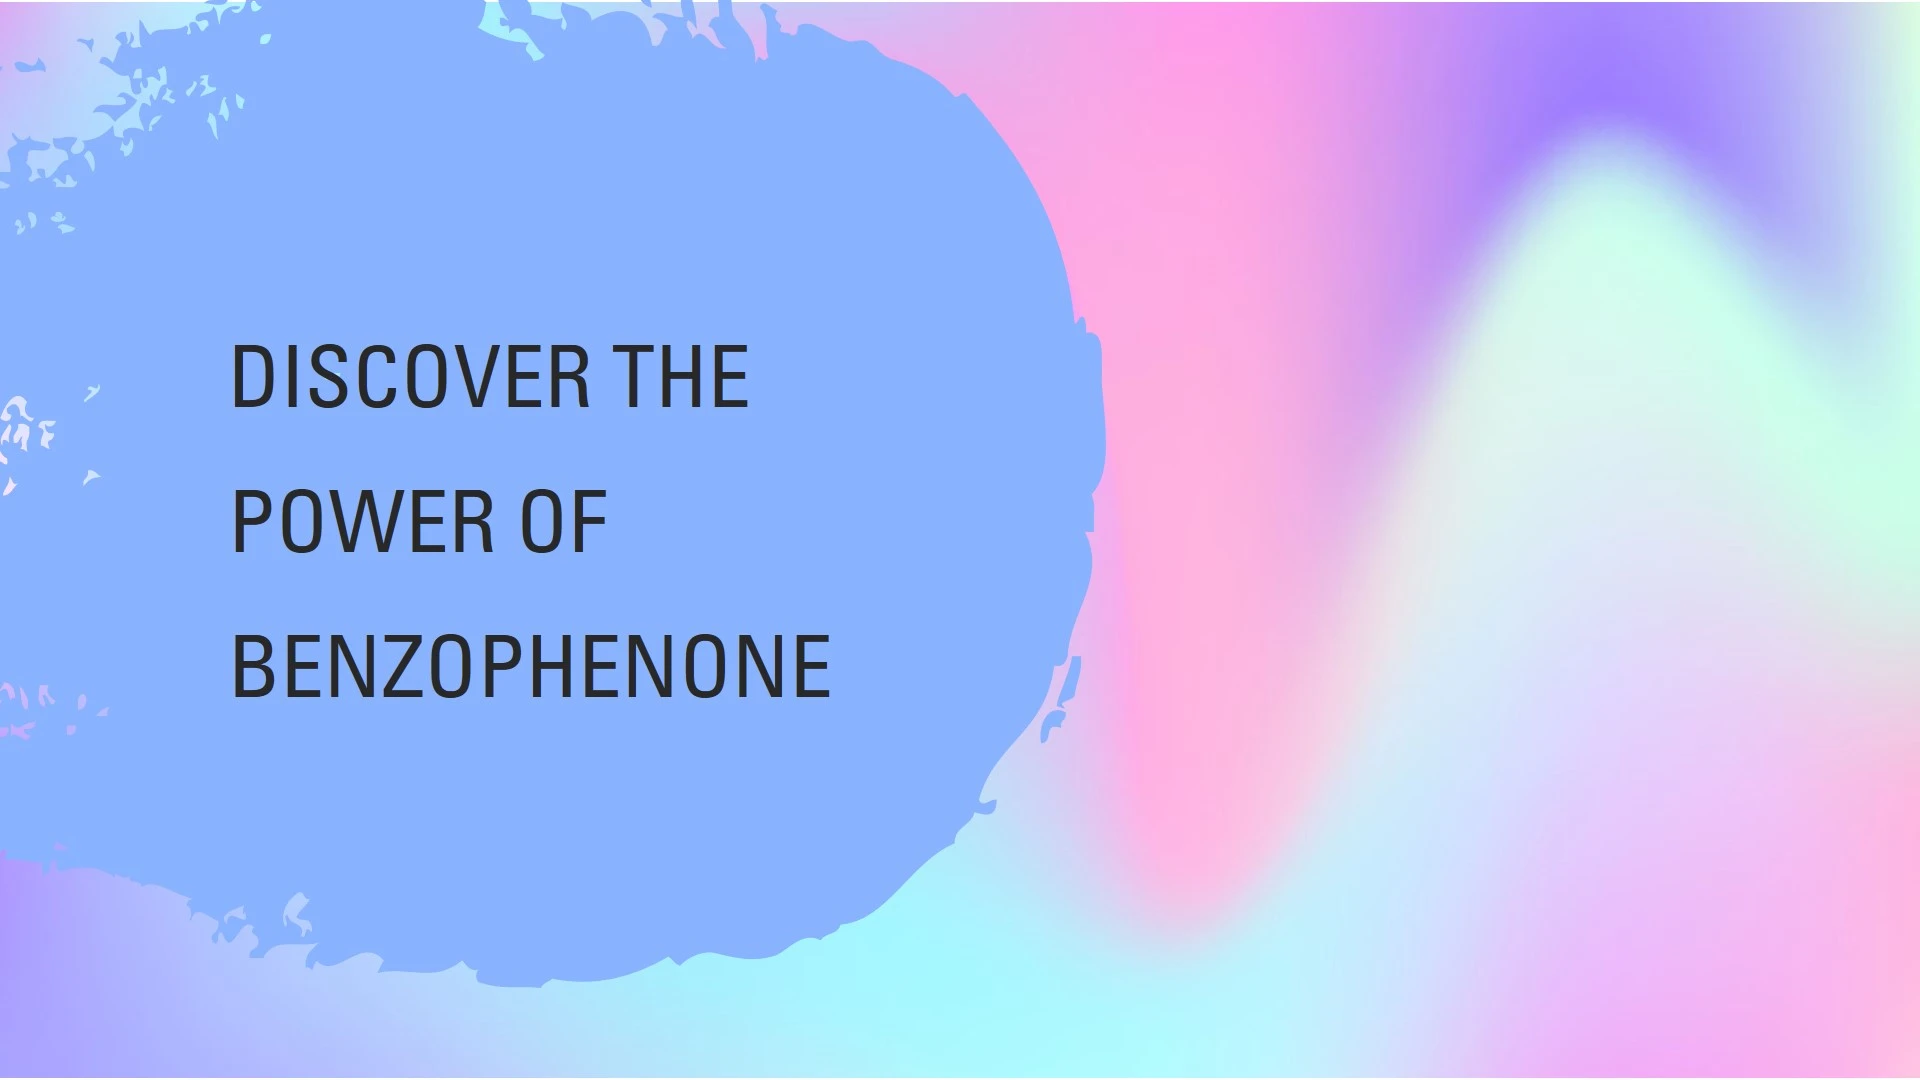 Benzophenone: The Uv Shield You Didn't Know About | Chemical Bull